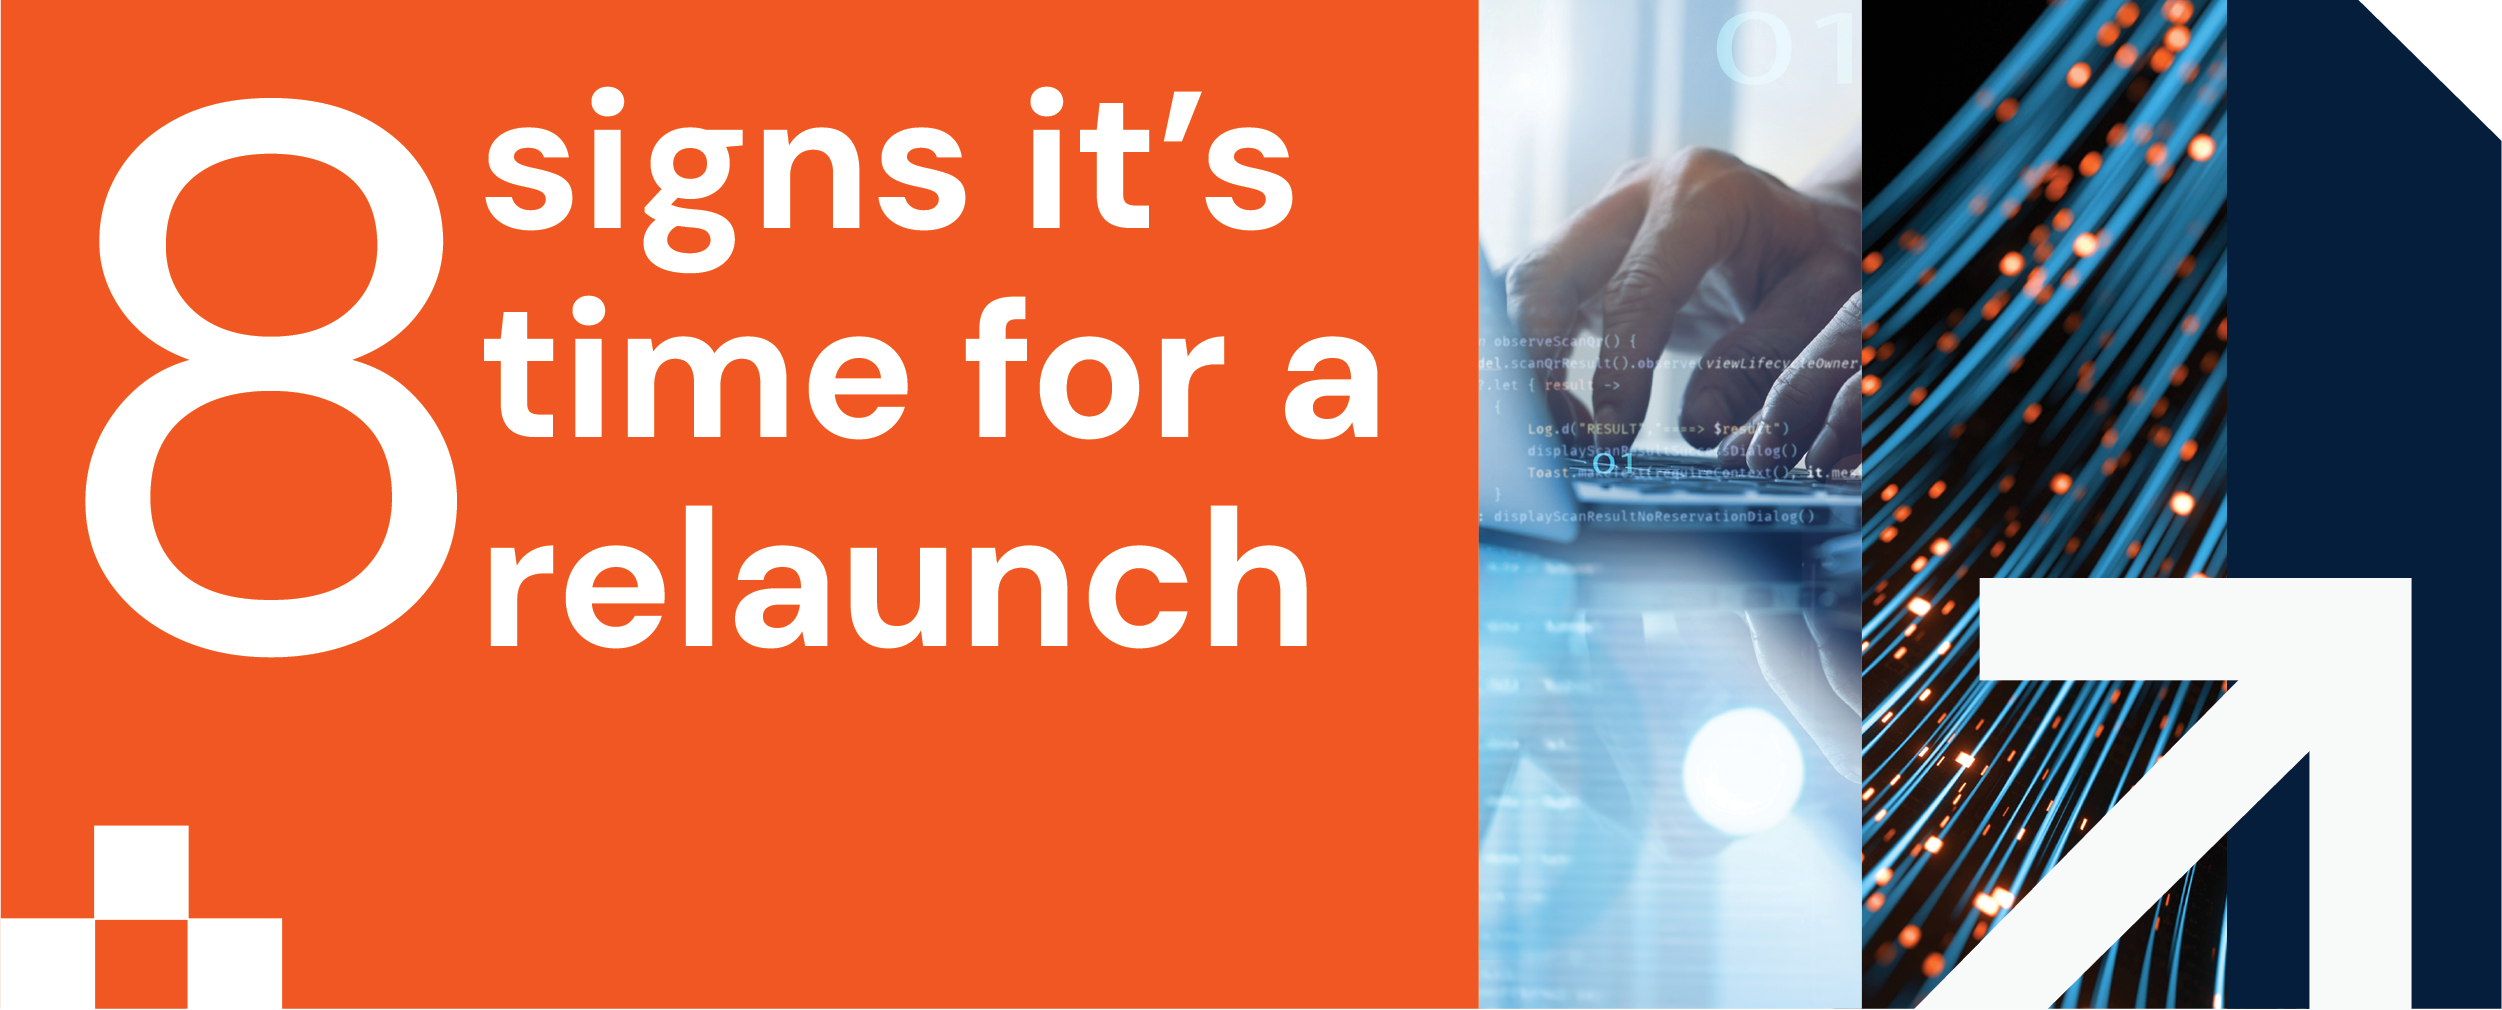 8 Signs It’s Time for a Relaunch